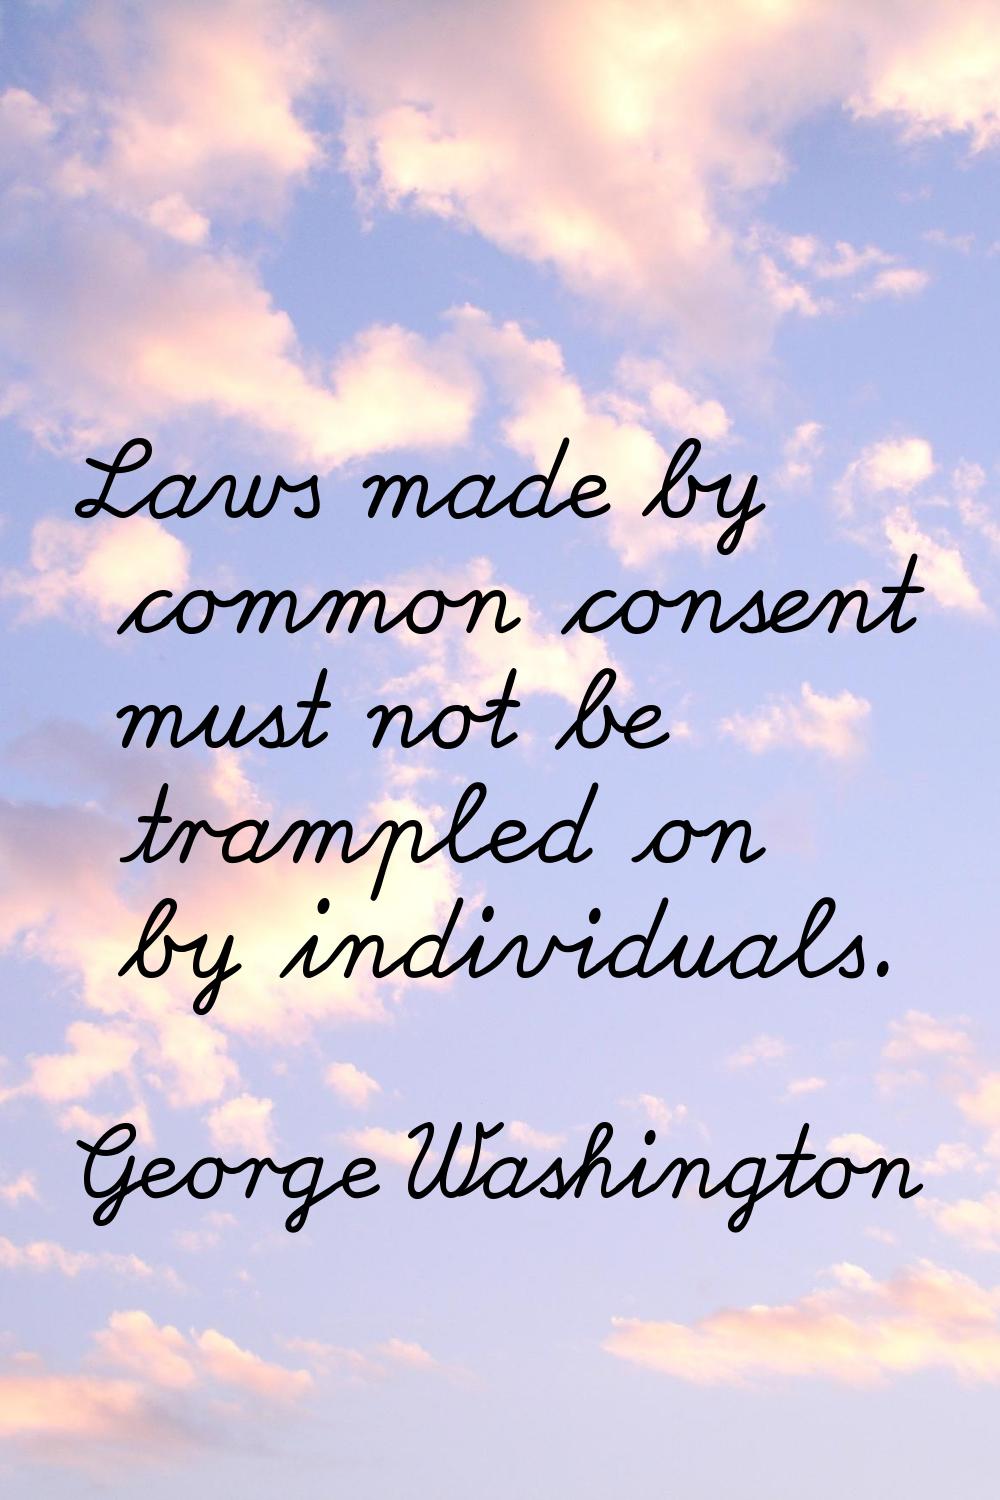 Laws made by common consent must not be trampled on by individuals.